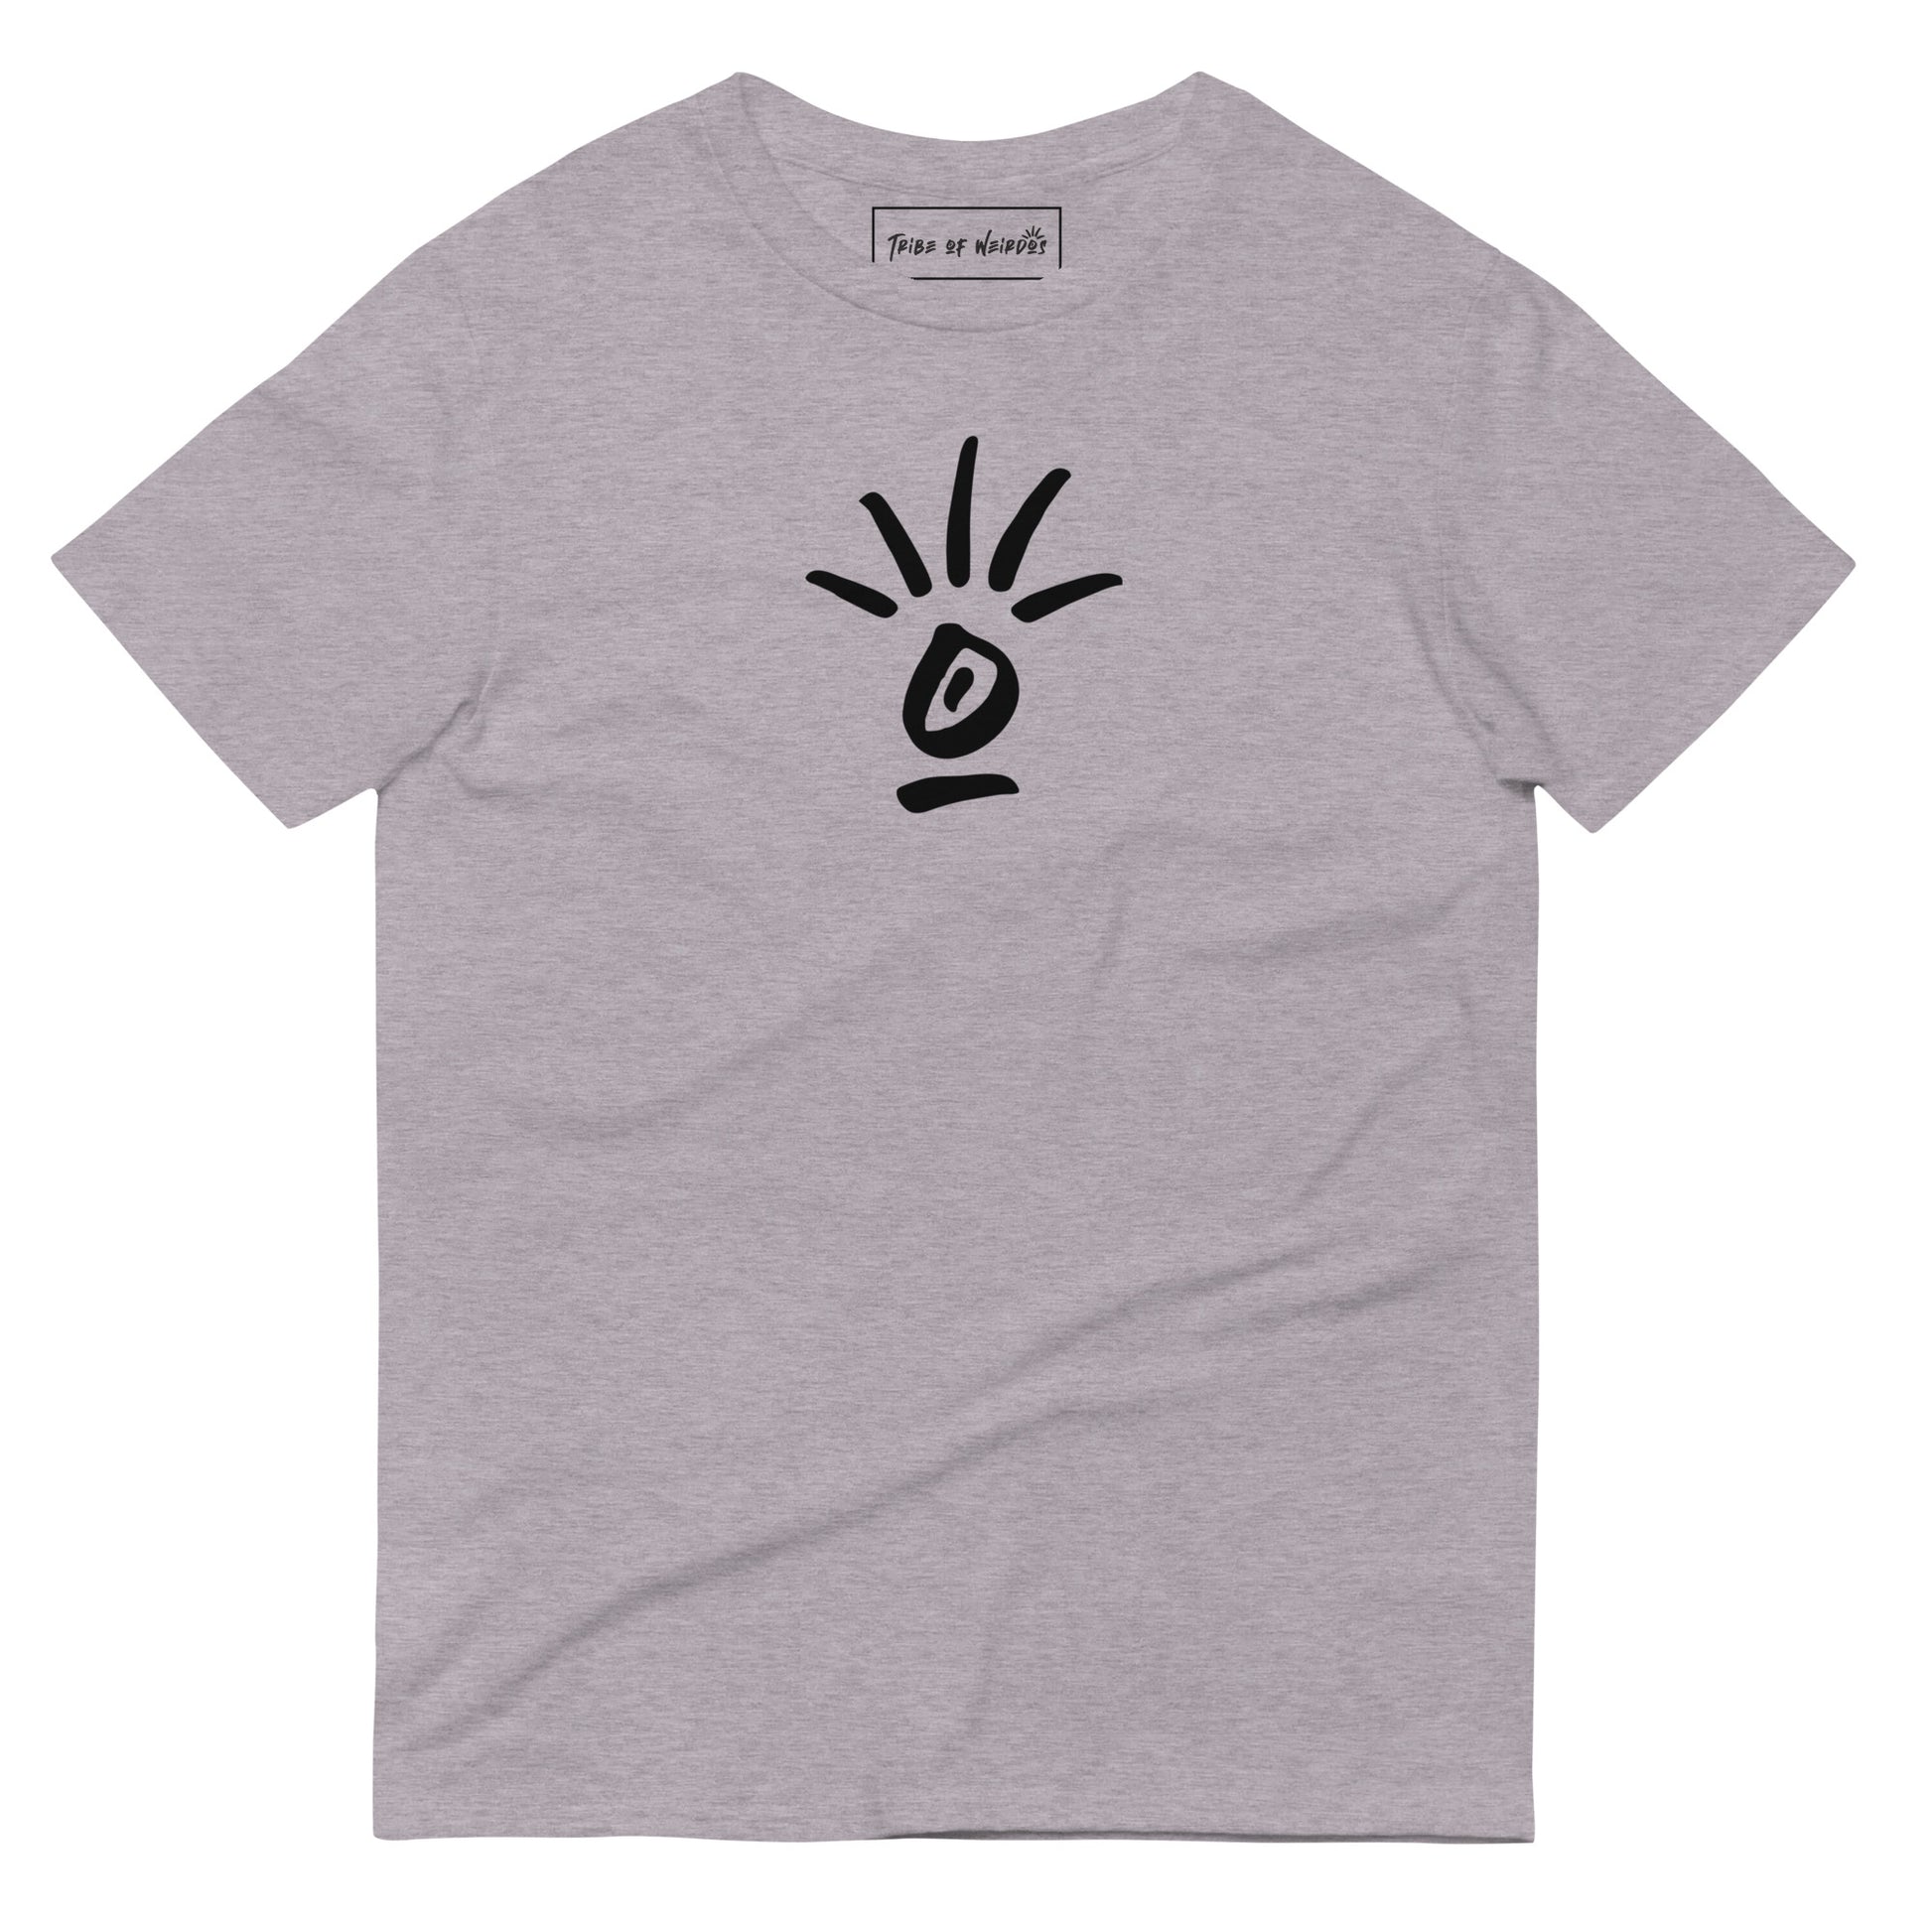 Serenely designed 'Tribe Eye - Practicing For Heaven' unisex t-shirt, a wearable reminder to live each moment with calm and intention.